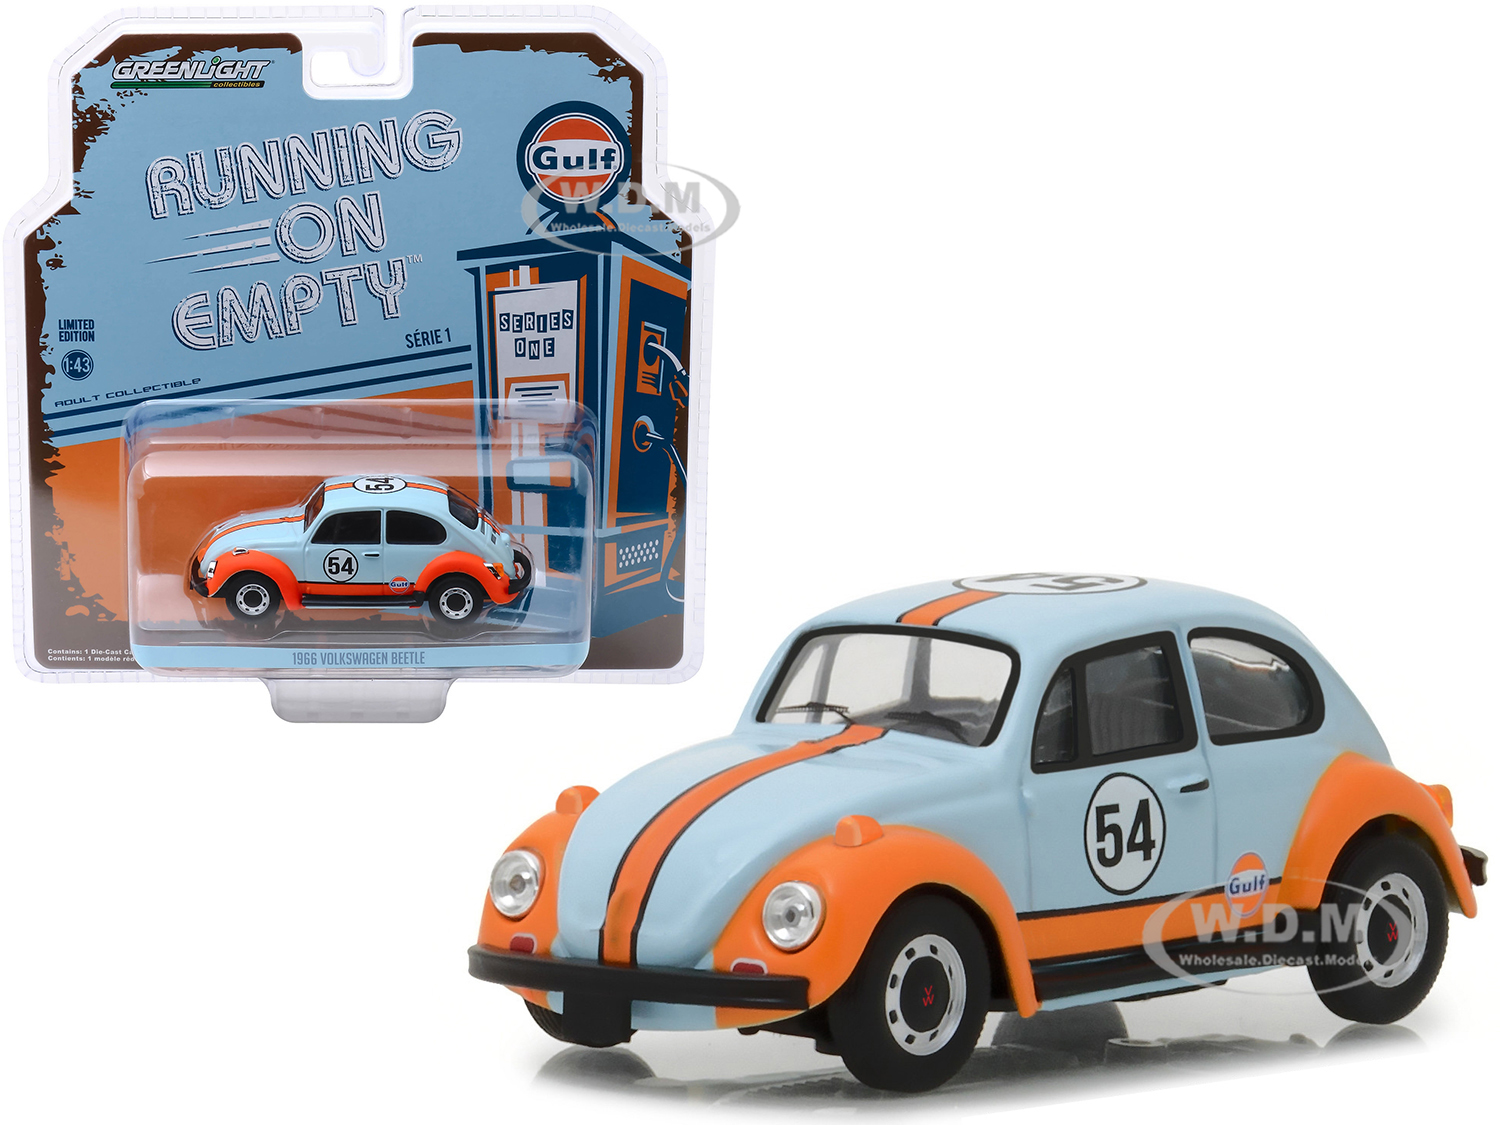 1966 Volkswagen Beetle 54 "gulf Oil" Light Blue And Orange "running On Empty" Release 1 1/43 Diecast Model Car By Greenlight